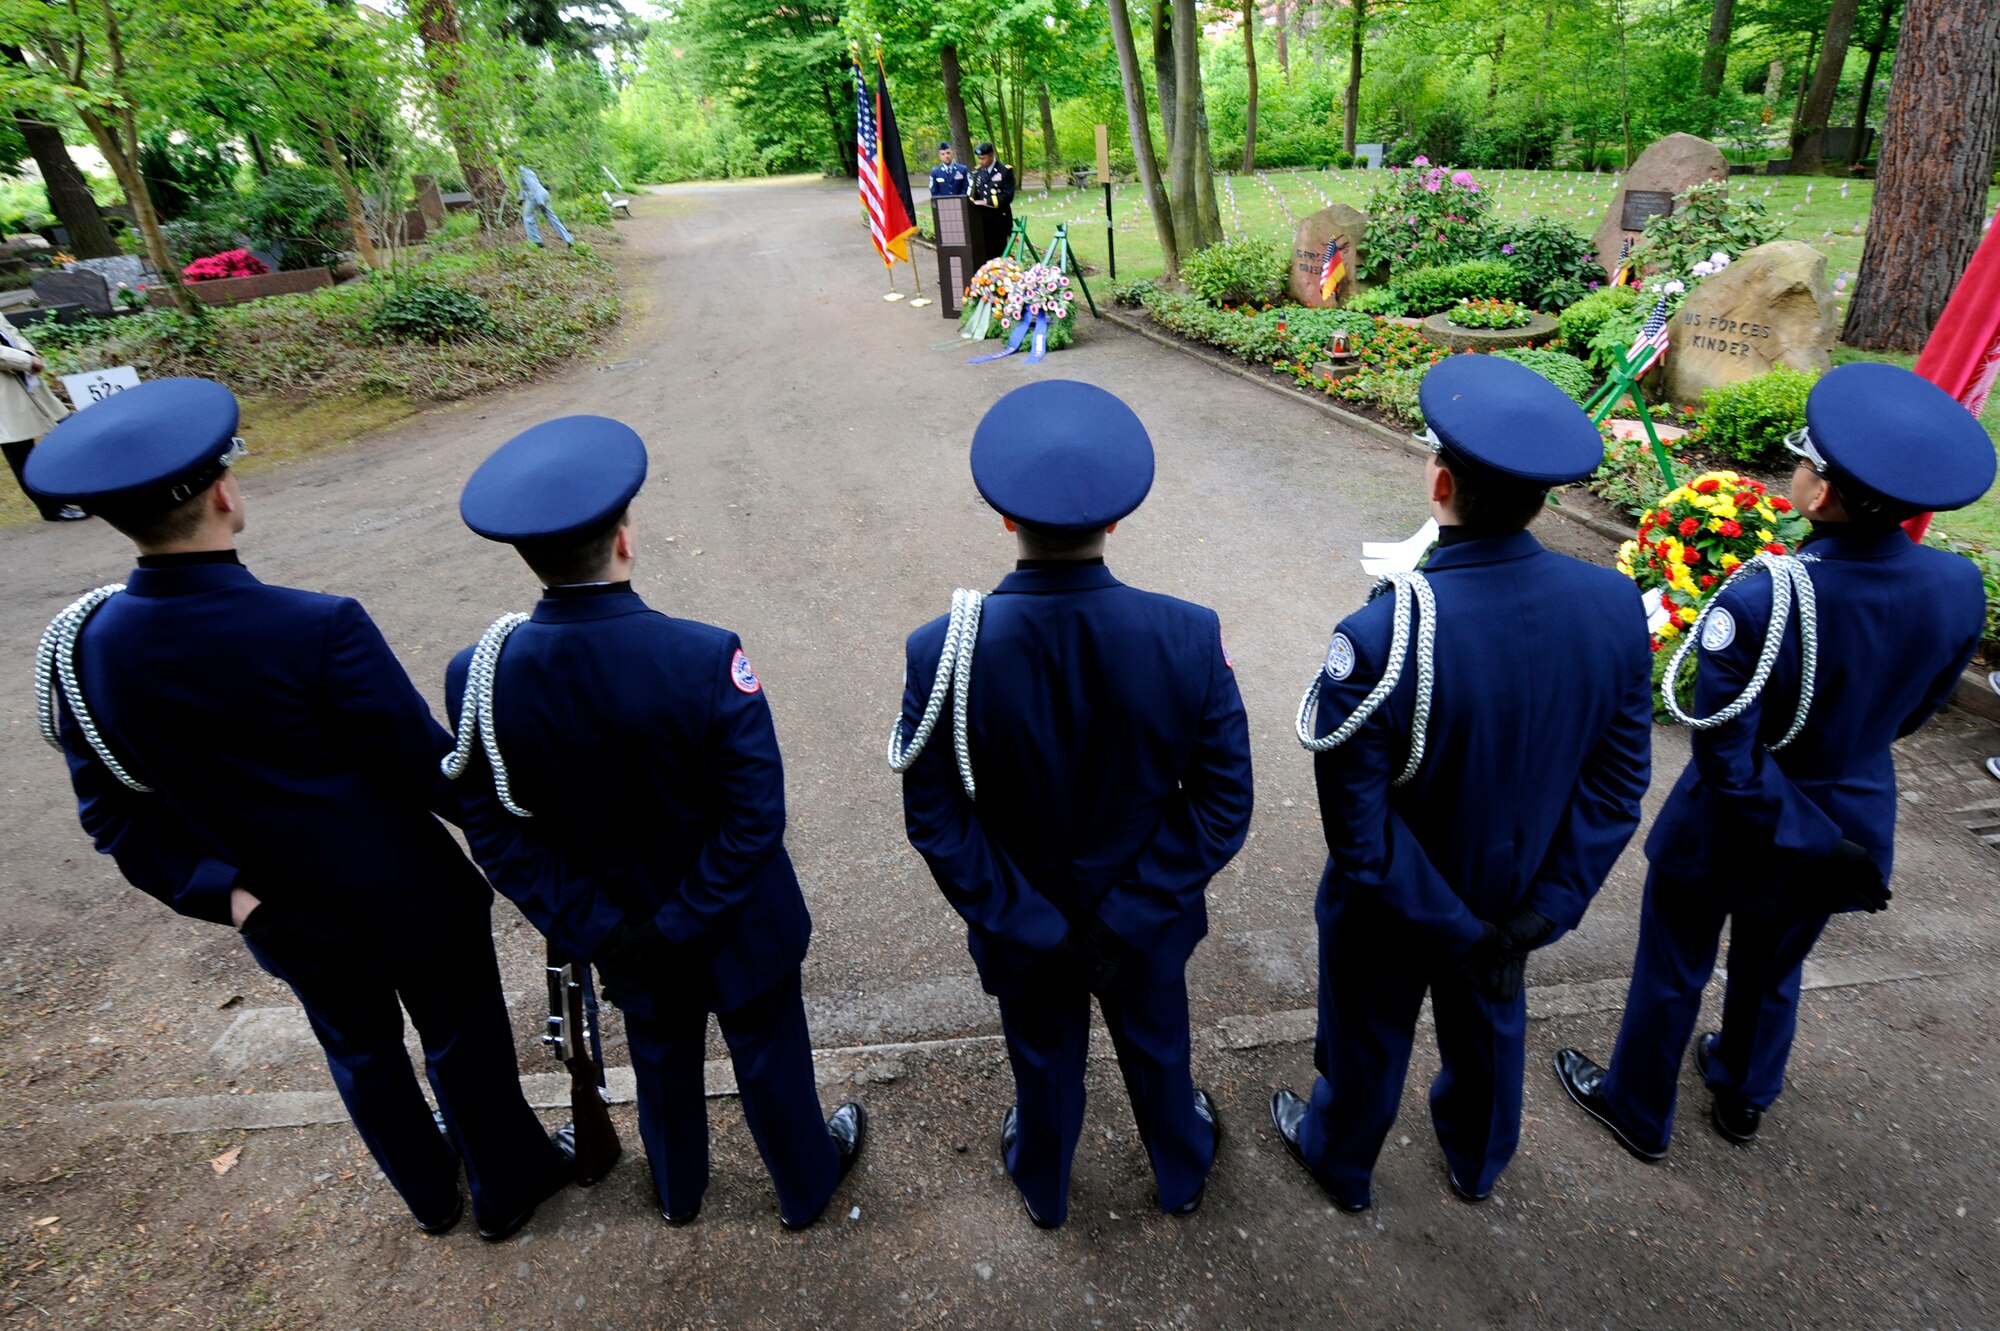 Airmen and their families attended the Kinder graves memorial service in
Kaiserslautern, Germany, May 19, 2012.The memorial service is held annually the week following Mother's Day to honor the children who weren't able to be buried in America. (U.S. Air Force photo/Senior Airman Aaron-Forrest Wainwright)
